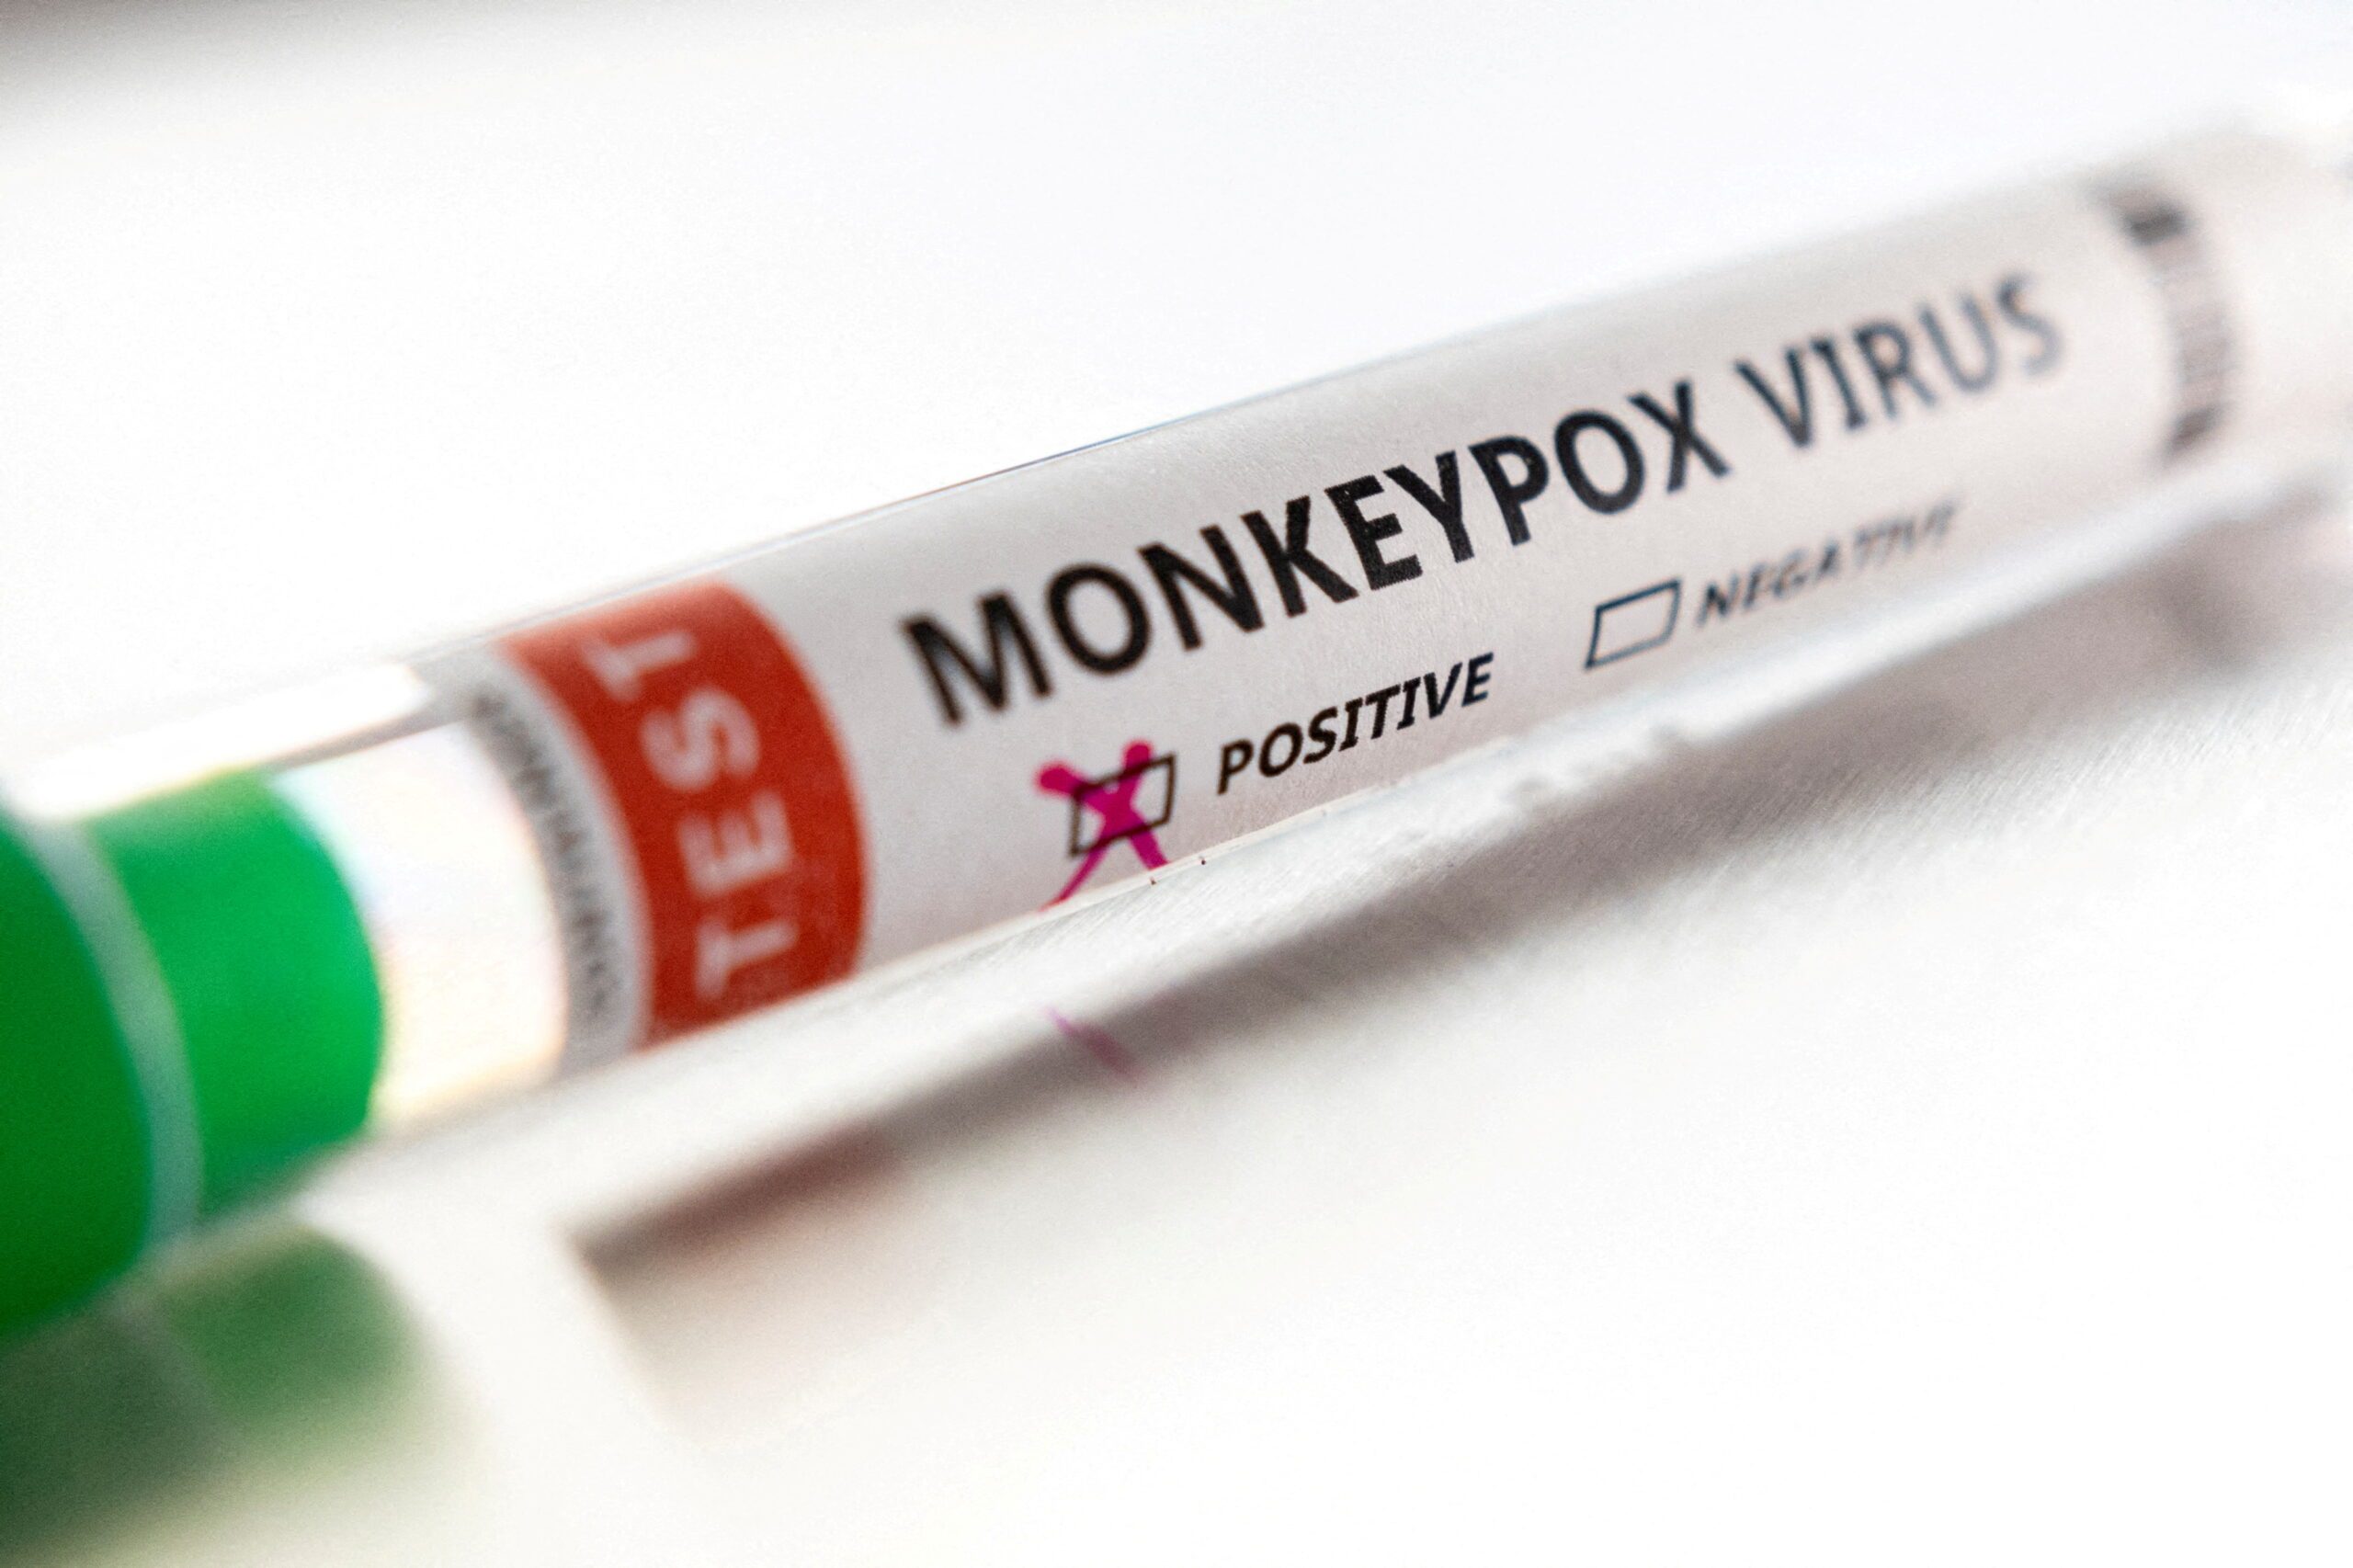 South Korea reports first confirmed monkeypox case, steps up monitoring